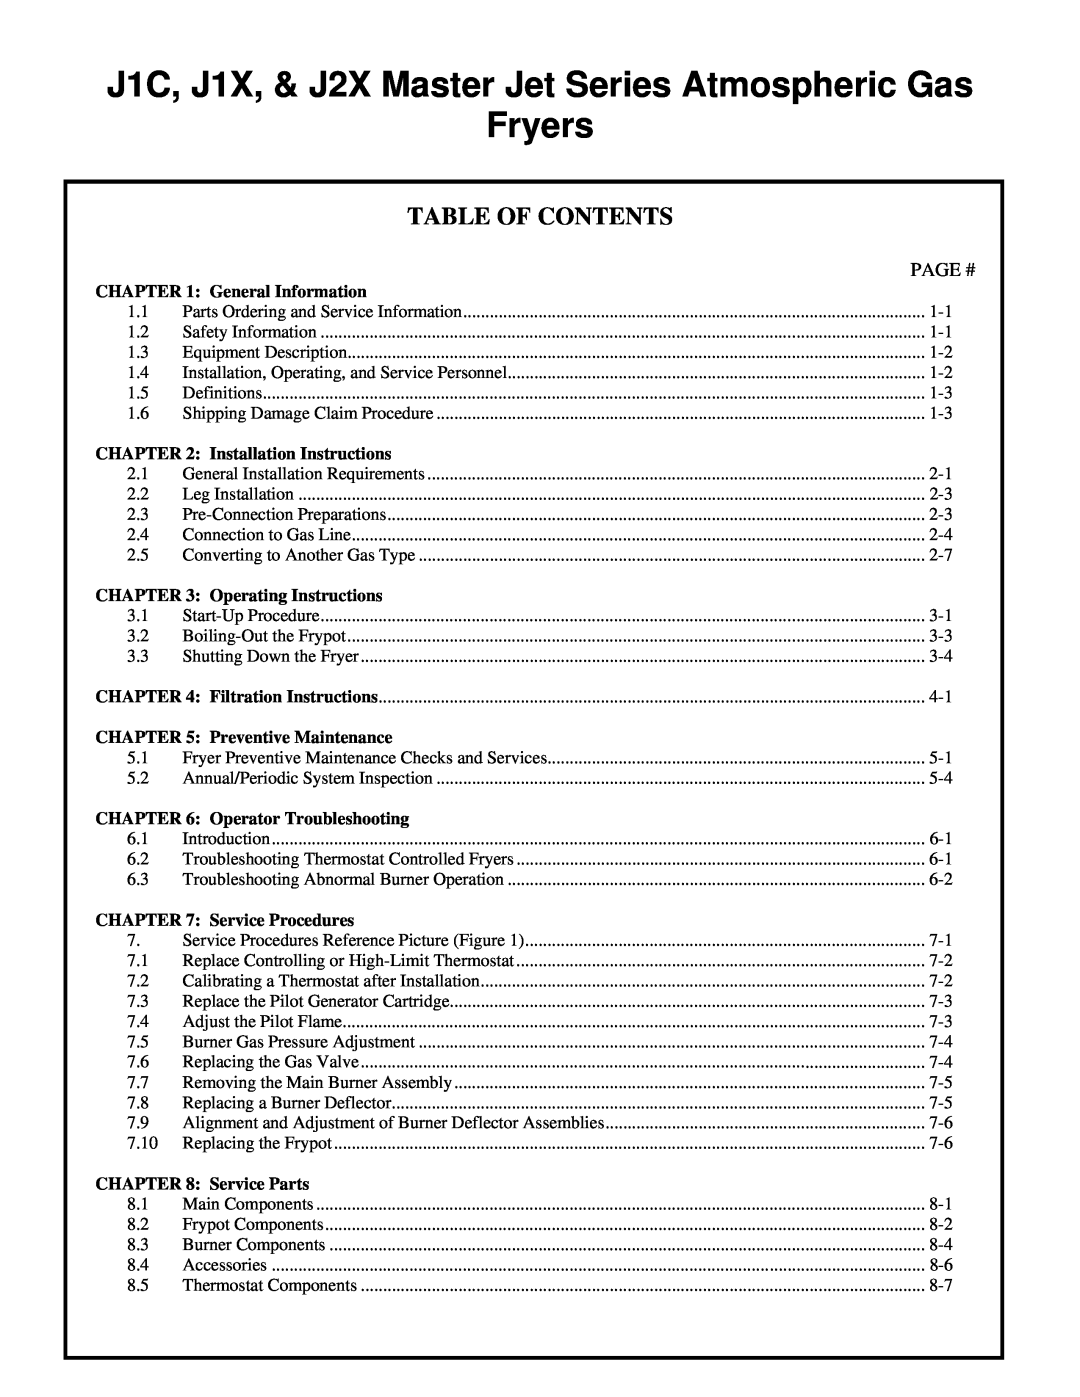 Frymaster J1C, J1X, & J2X Master Jet Series Atmospheric Gas Fryers, Table Of Contents, Page #, General Information 